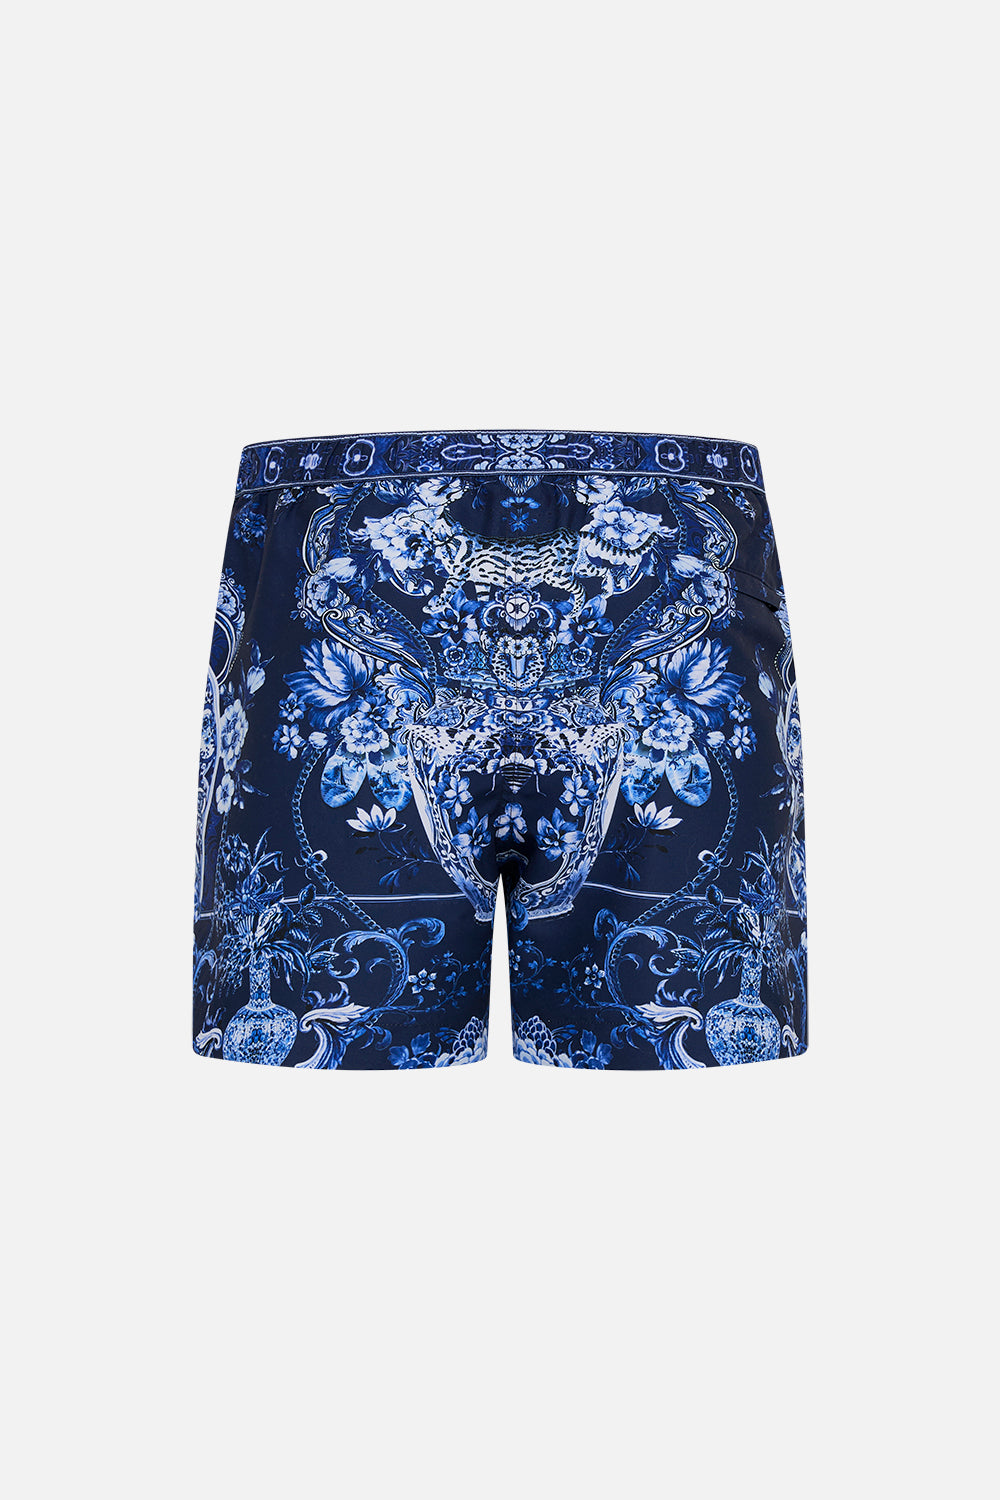 Back product view of Hotel Franks By CAMILLA mens blue swim shorts in Delft Dynasty print